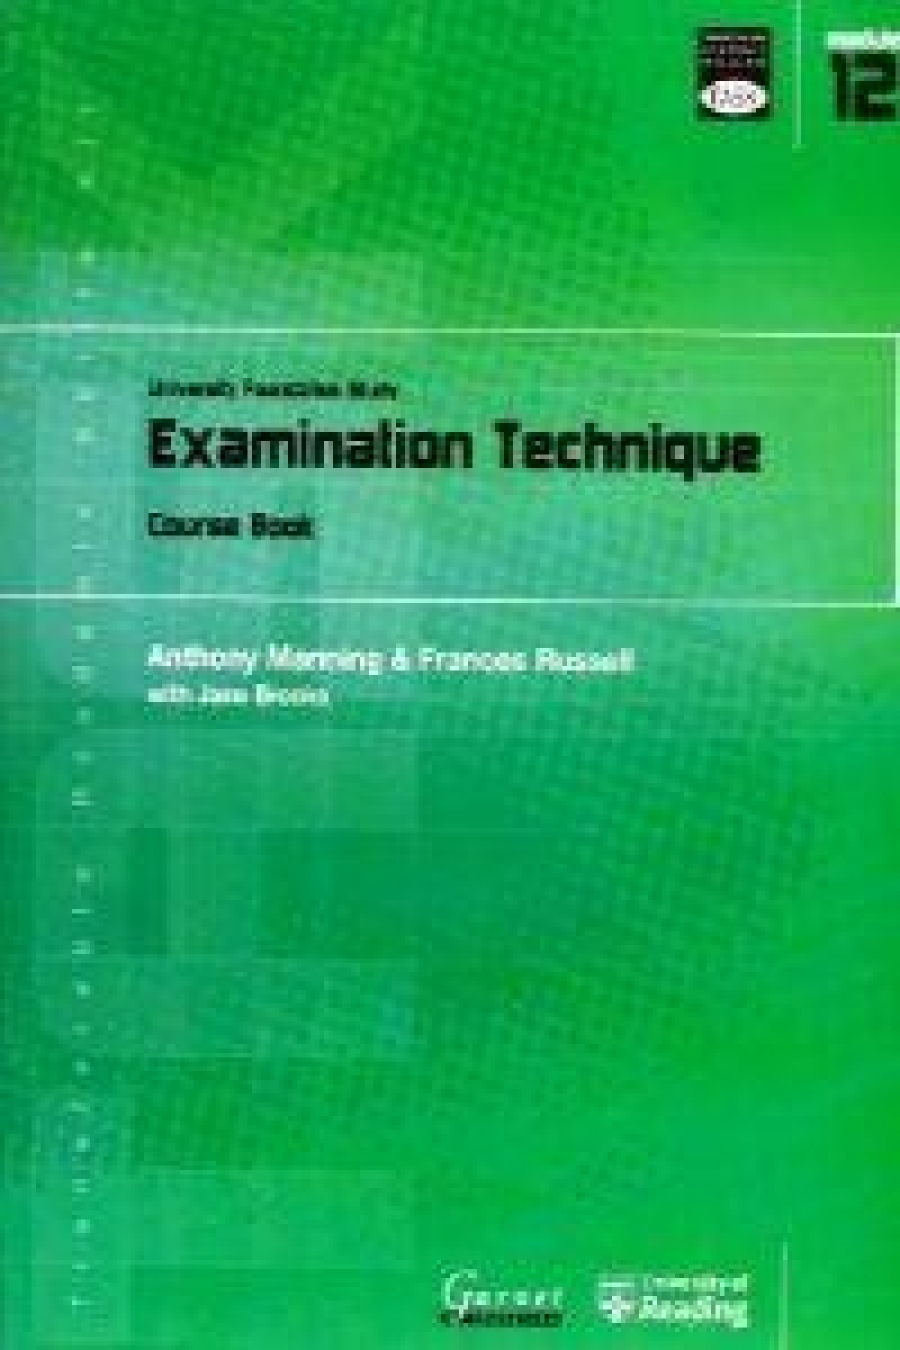 Frances, Manning, Anthony; Russell Transferable Academic Skills Kit: University Foundation Study. Module 12: Examination Technique. Course Book 